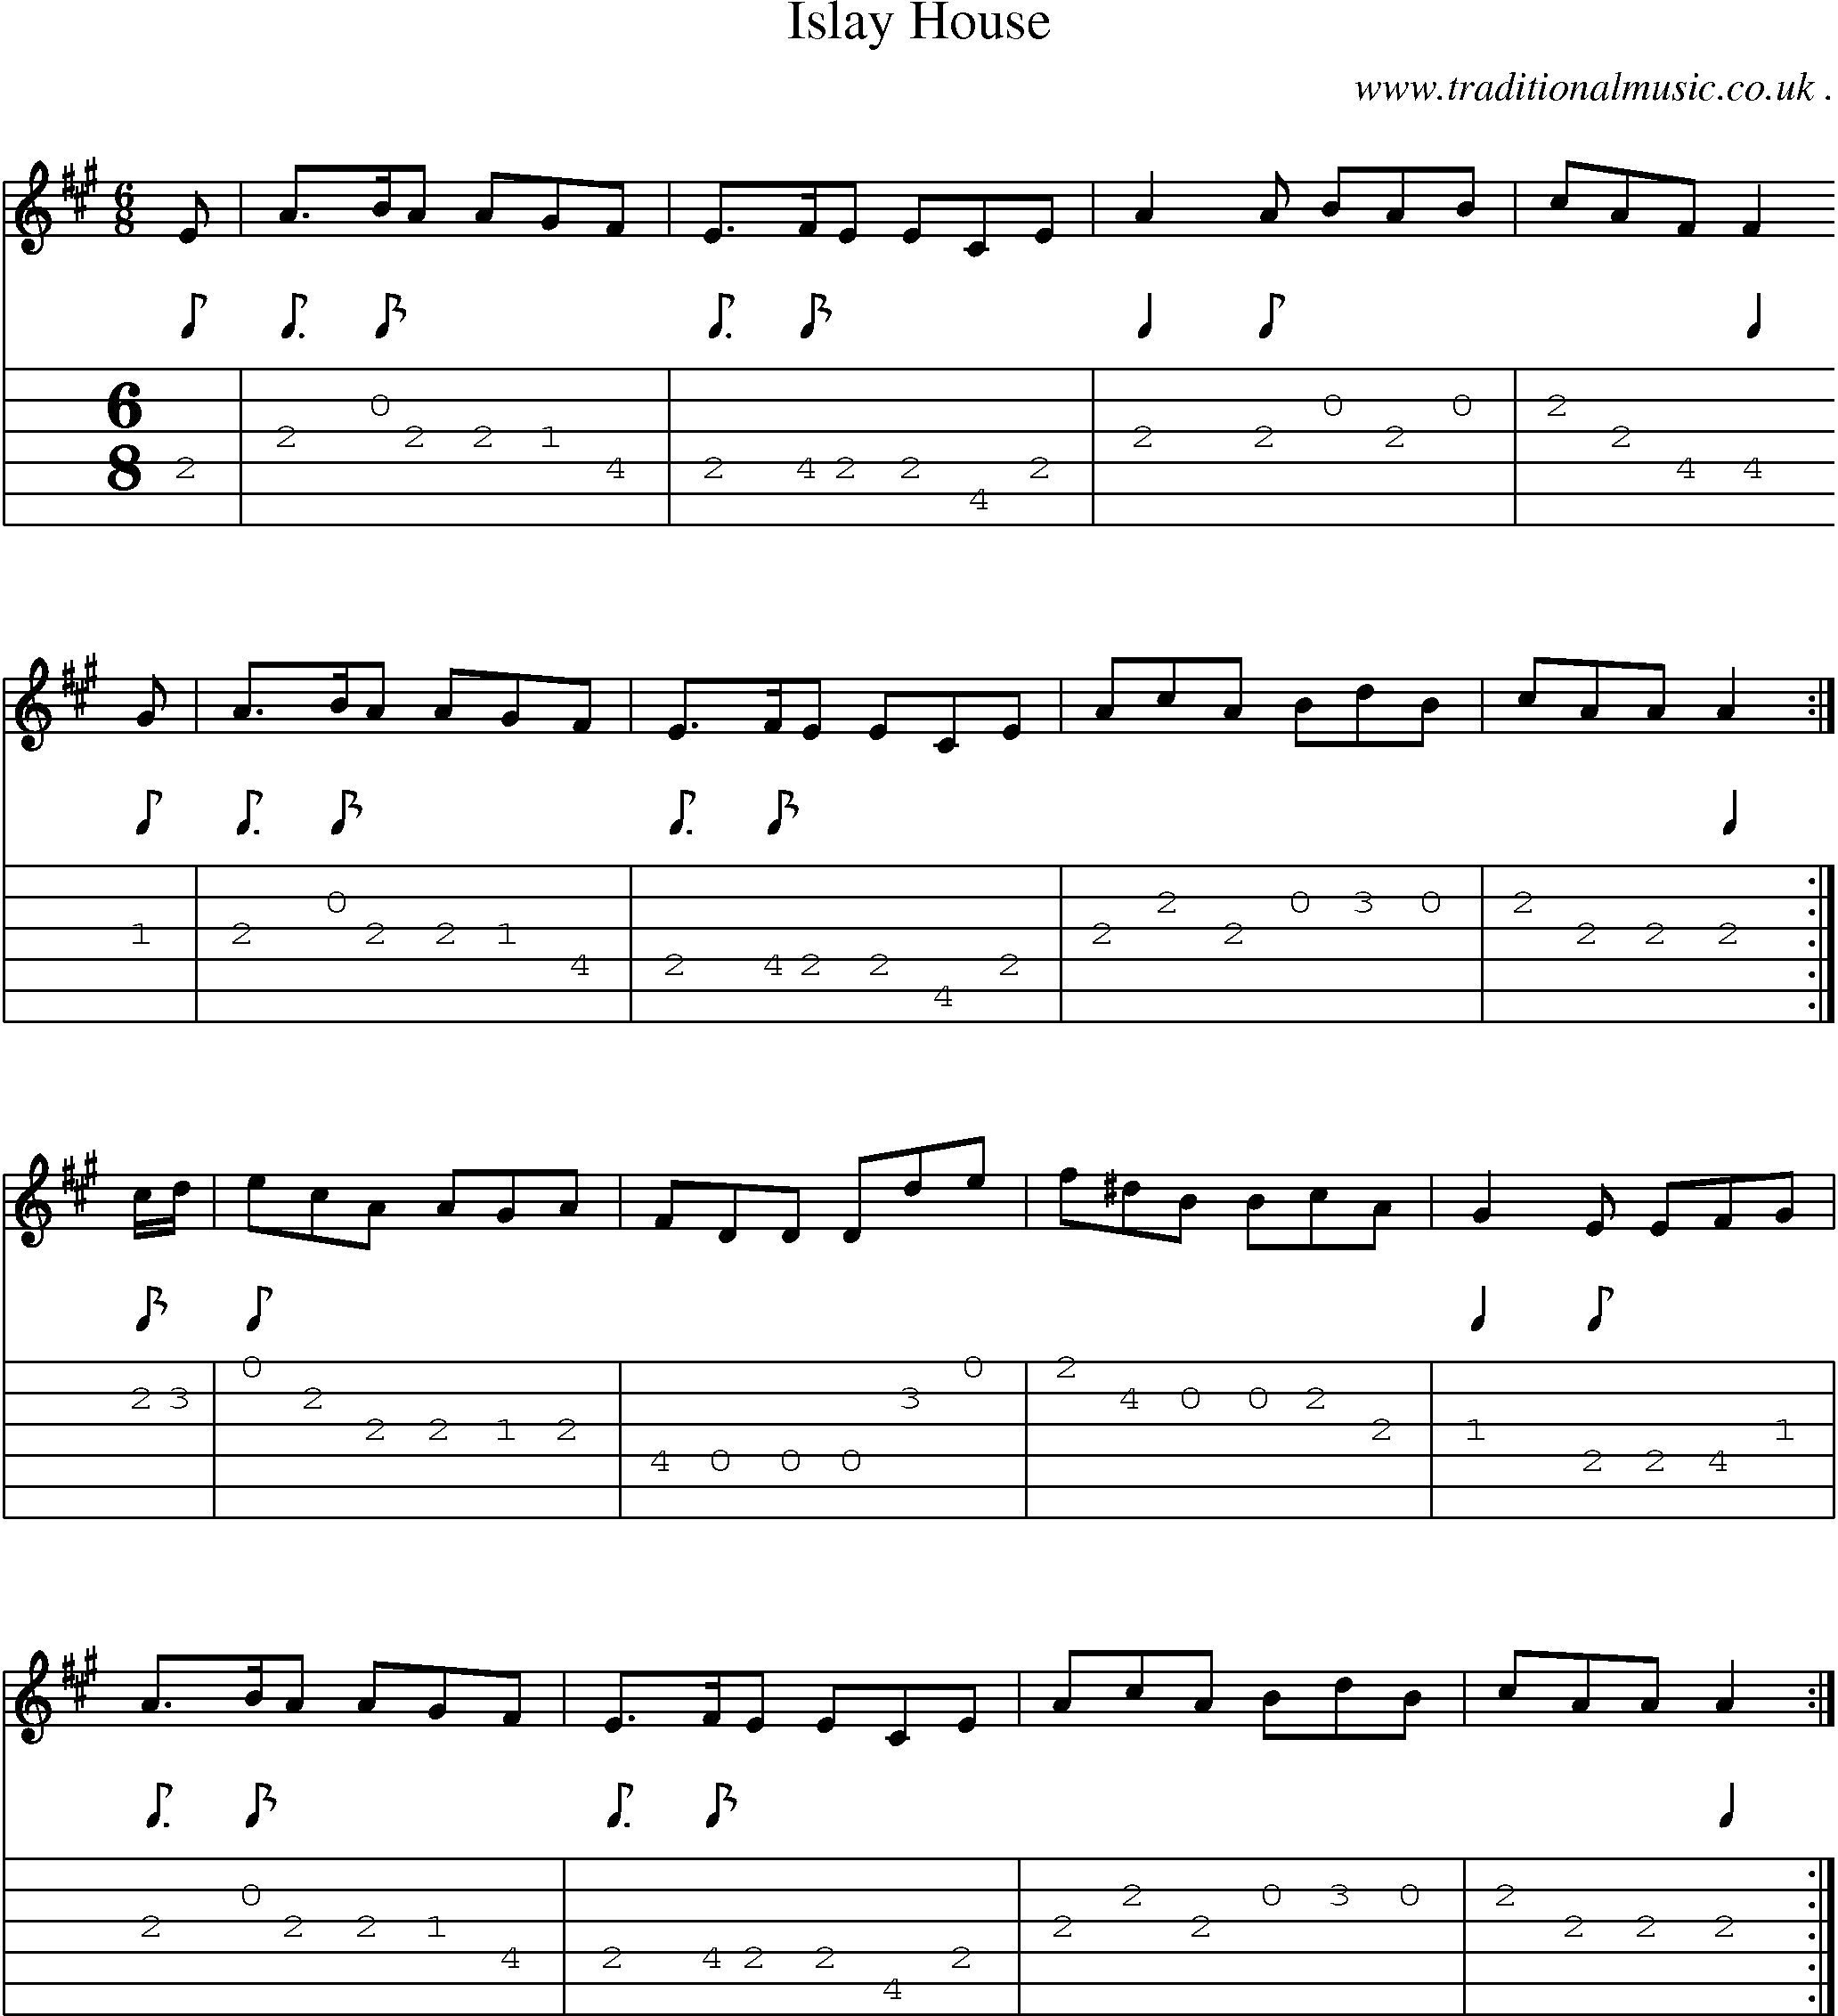 Sheet-music  score, Chords and Guitar Tabs for Islay House